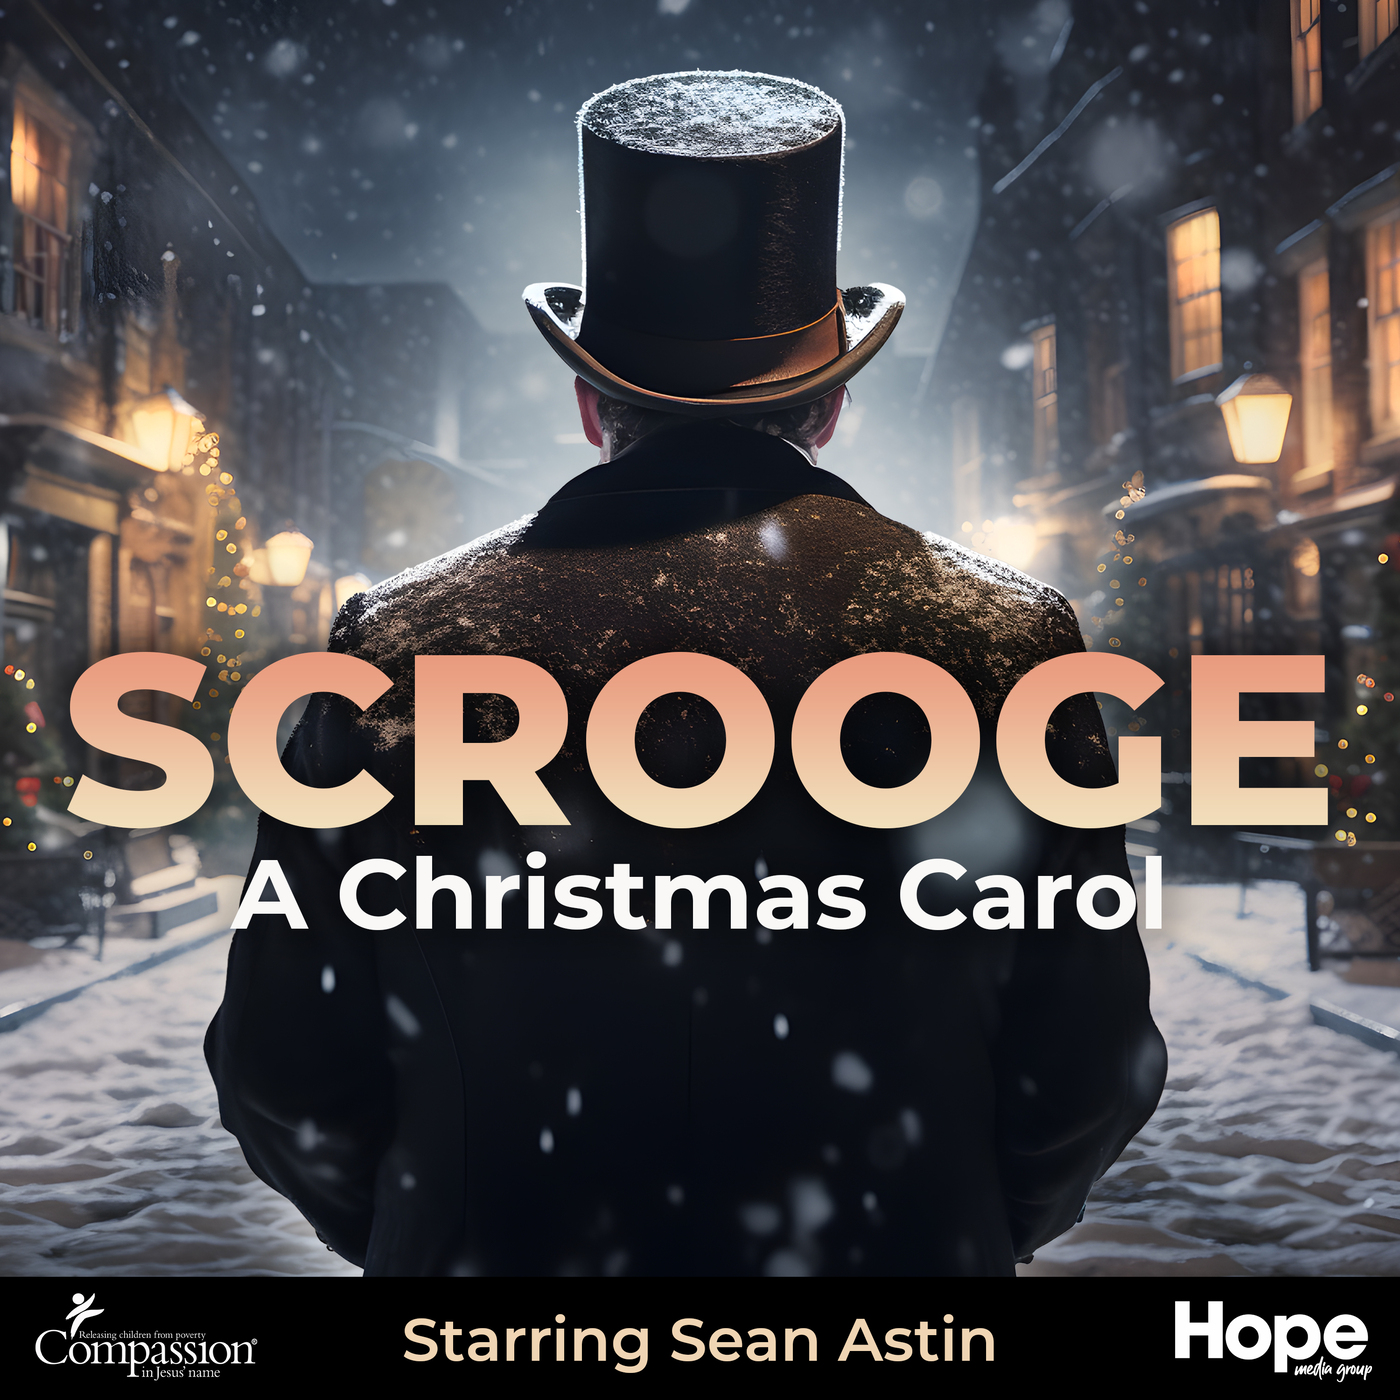 « God Bless Us, Every One » (Theme from Scrooge: A Christmas Carol) by Kerrie Roberts